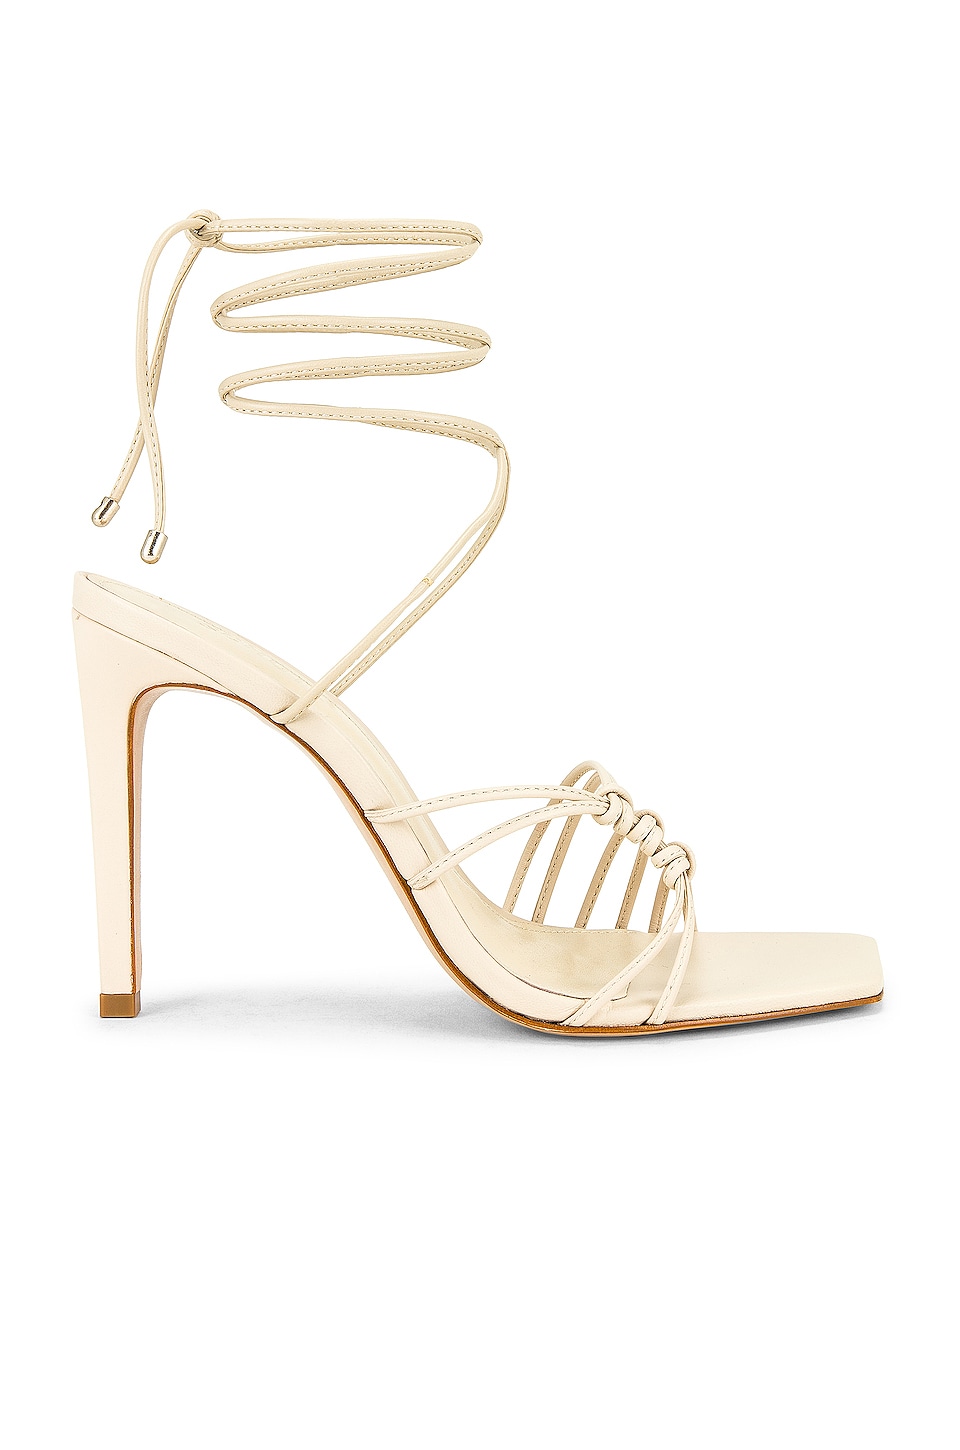 Cream strappy sandals with lace-up details